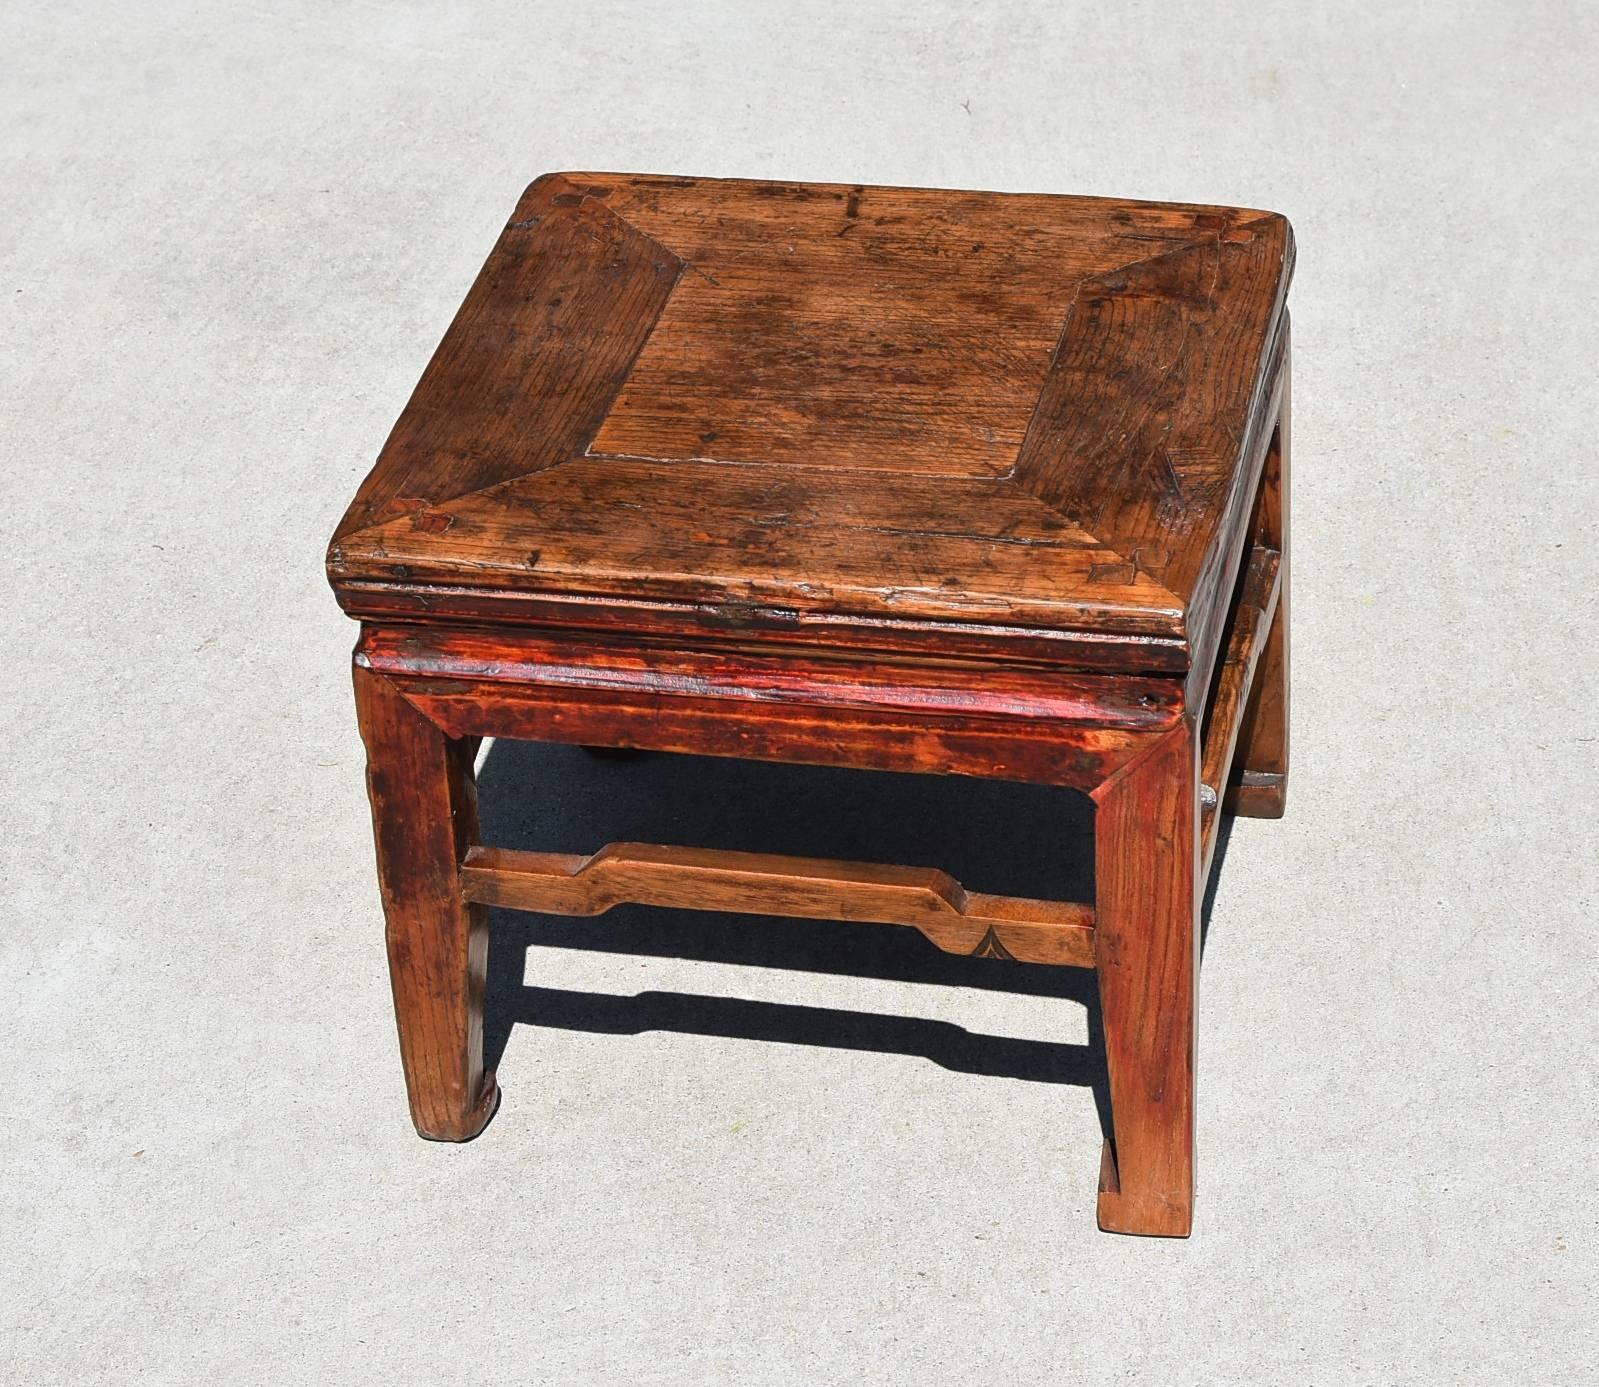 Rustic charm at its best. Small square stool is made of solid wood, using tenons and mortises. Raised stretchers and a waist add design interest. Hoof Legs enhance its country charm. Solid, sturdy, versatile. Shan Dong province.
 